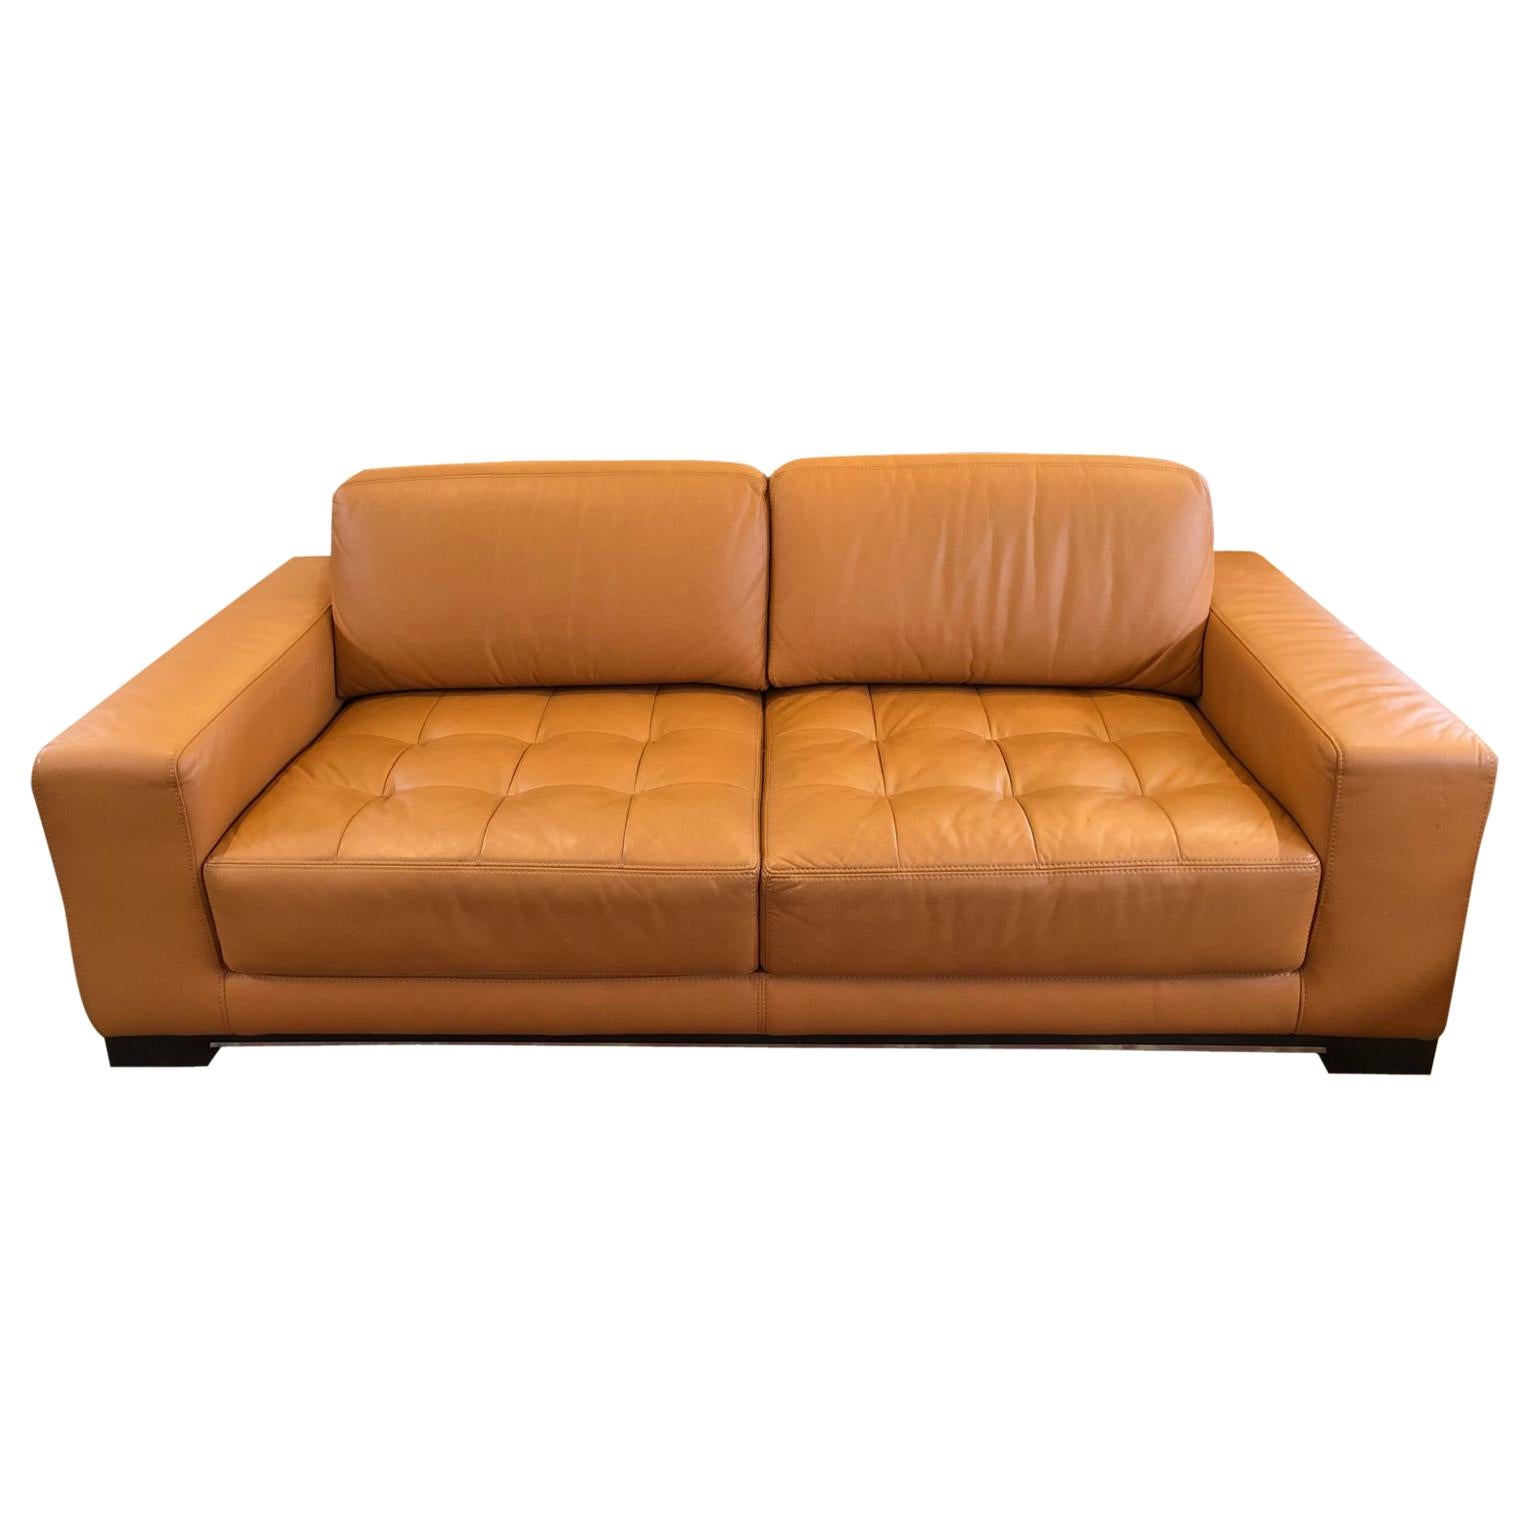 Carmel Leather Sofa by W. Schillig In Good Condition For Sale In San Francisco, CA